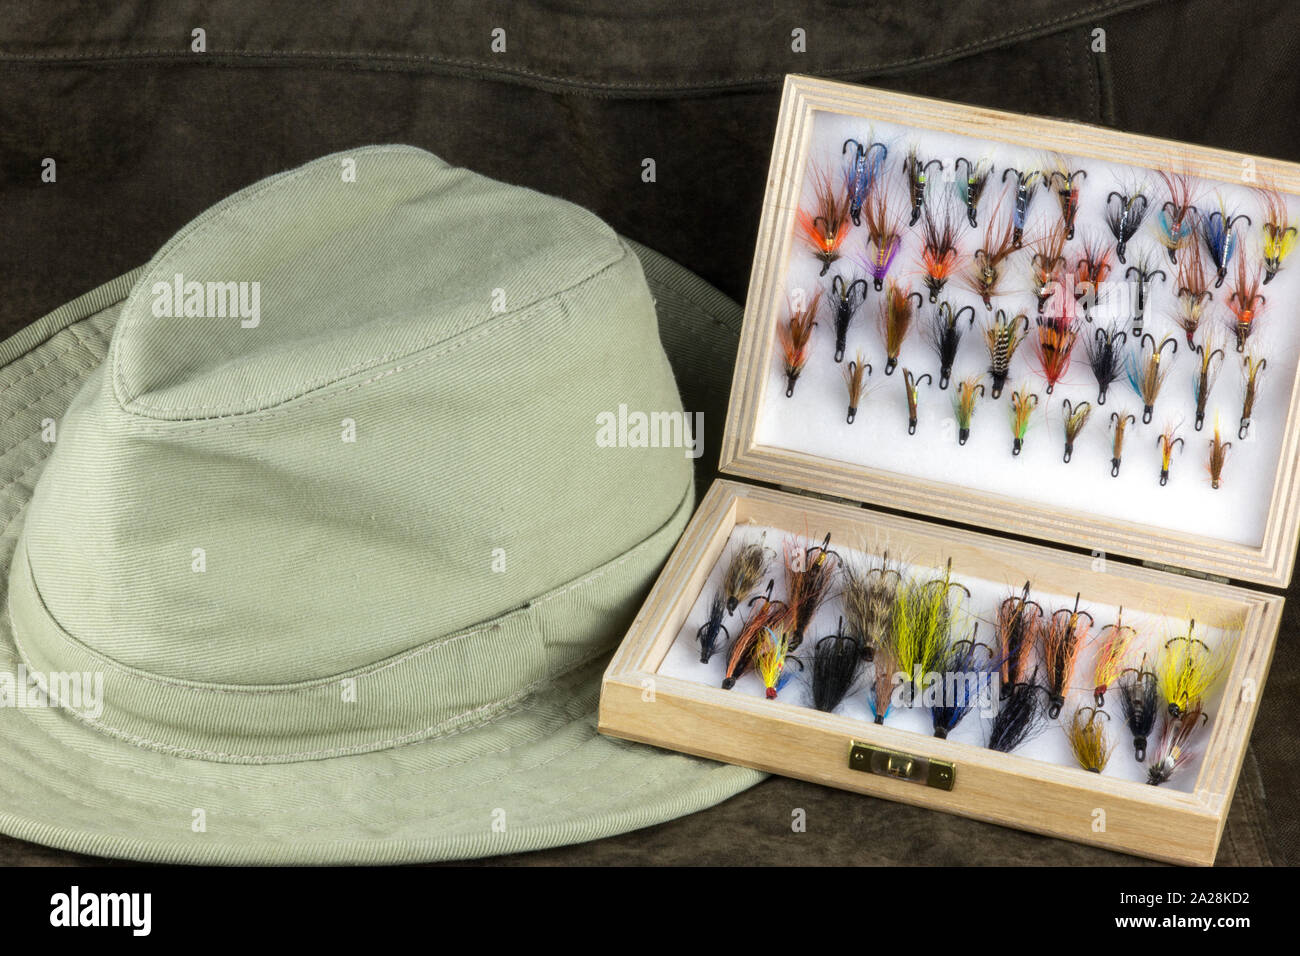 https://c8.alamy.com/comp/2A28KD2/fishing-flies-in-wooden-fly-box-with-hat-on-an-outdoor-coat-2A28KD2.jpg